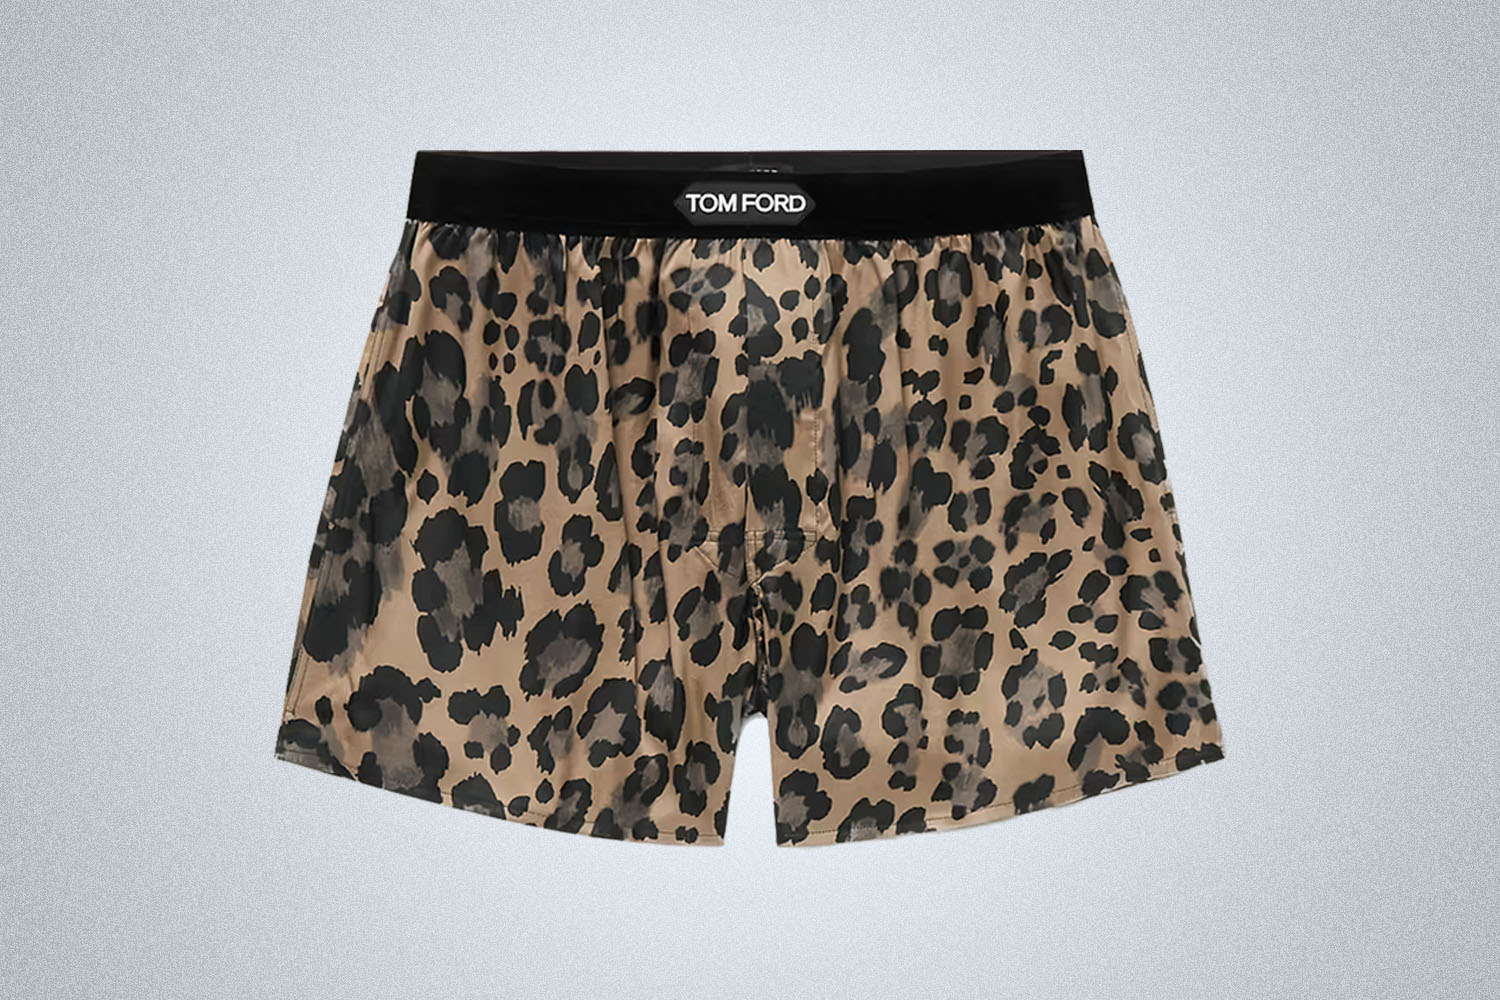 a pair of printed Tom Ford silk boxers on a grey background